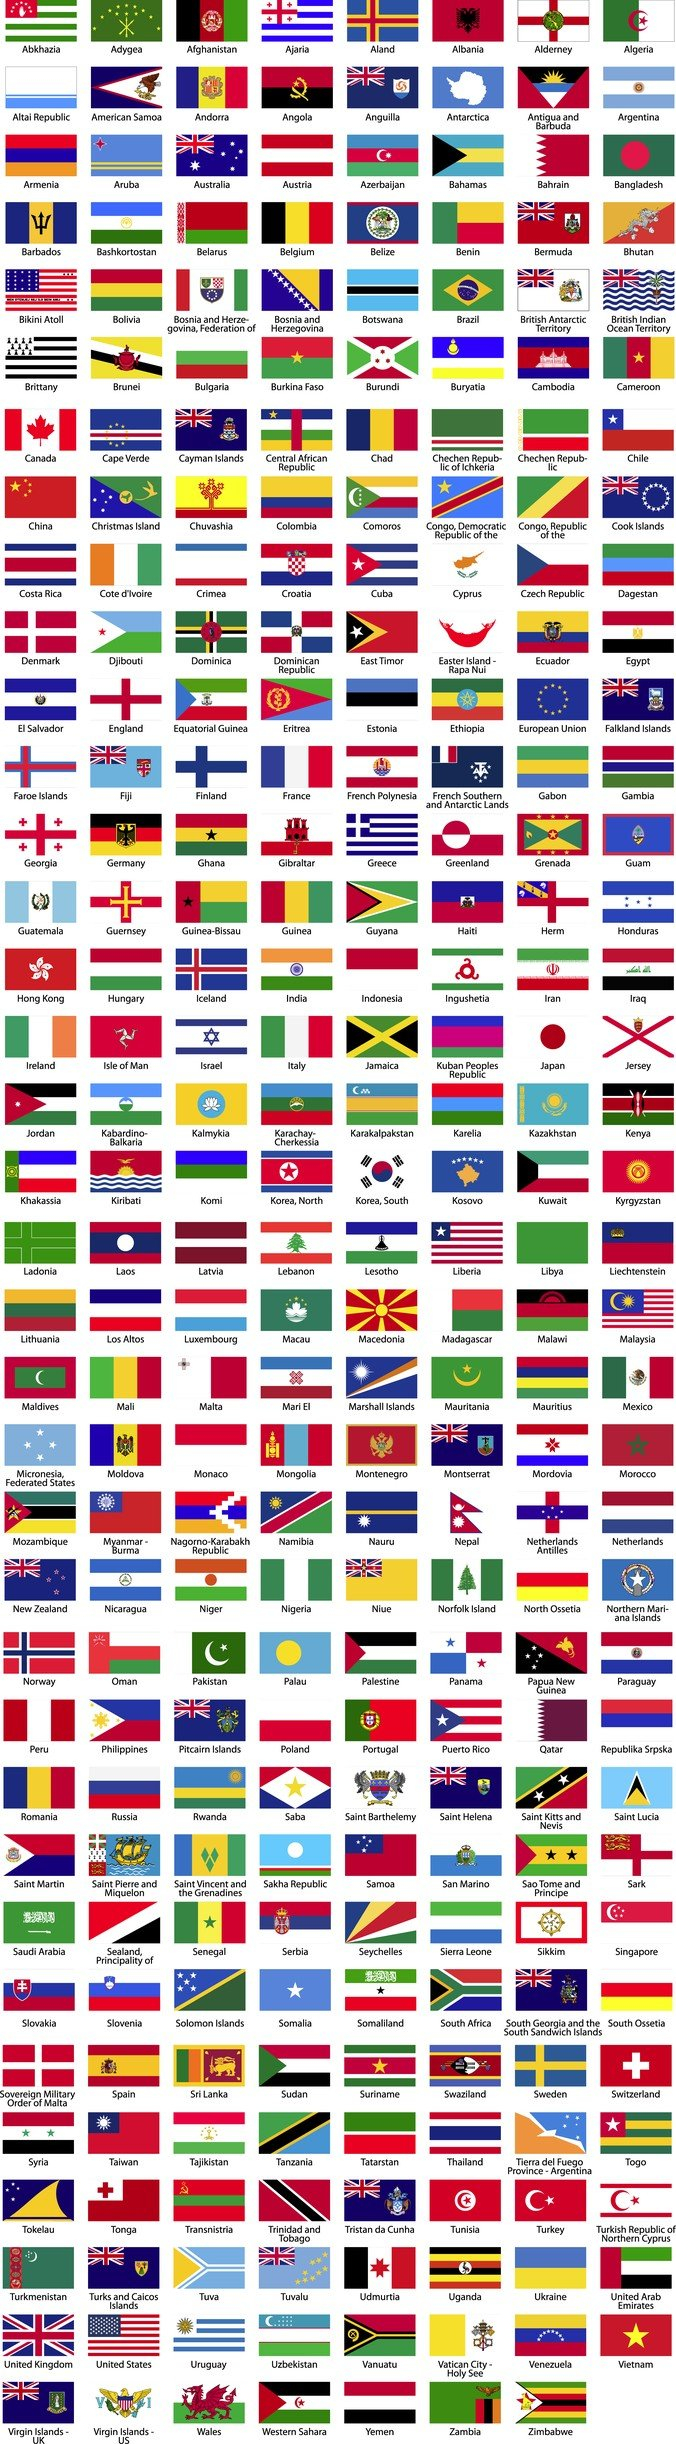 adobe,africa,all,america,antarctica,art,asia,atlas,canada,china,clip-art,clipart,coat,of,arms,color,concept,continent,coreldraw,country,design,detailed,earth,east,element,emblem,eps,europe,flag,geography,global,government,heritage,icon,illustration,illustrator,image,india,insignia,international,japan,land,map,nation,national,north,ocean,official,patriotism,pennant,planet,russia,set,sign,south,state,symbol,travel,uk,usa,vector,vector,graphic,west,white,world,com365psd